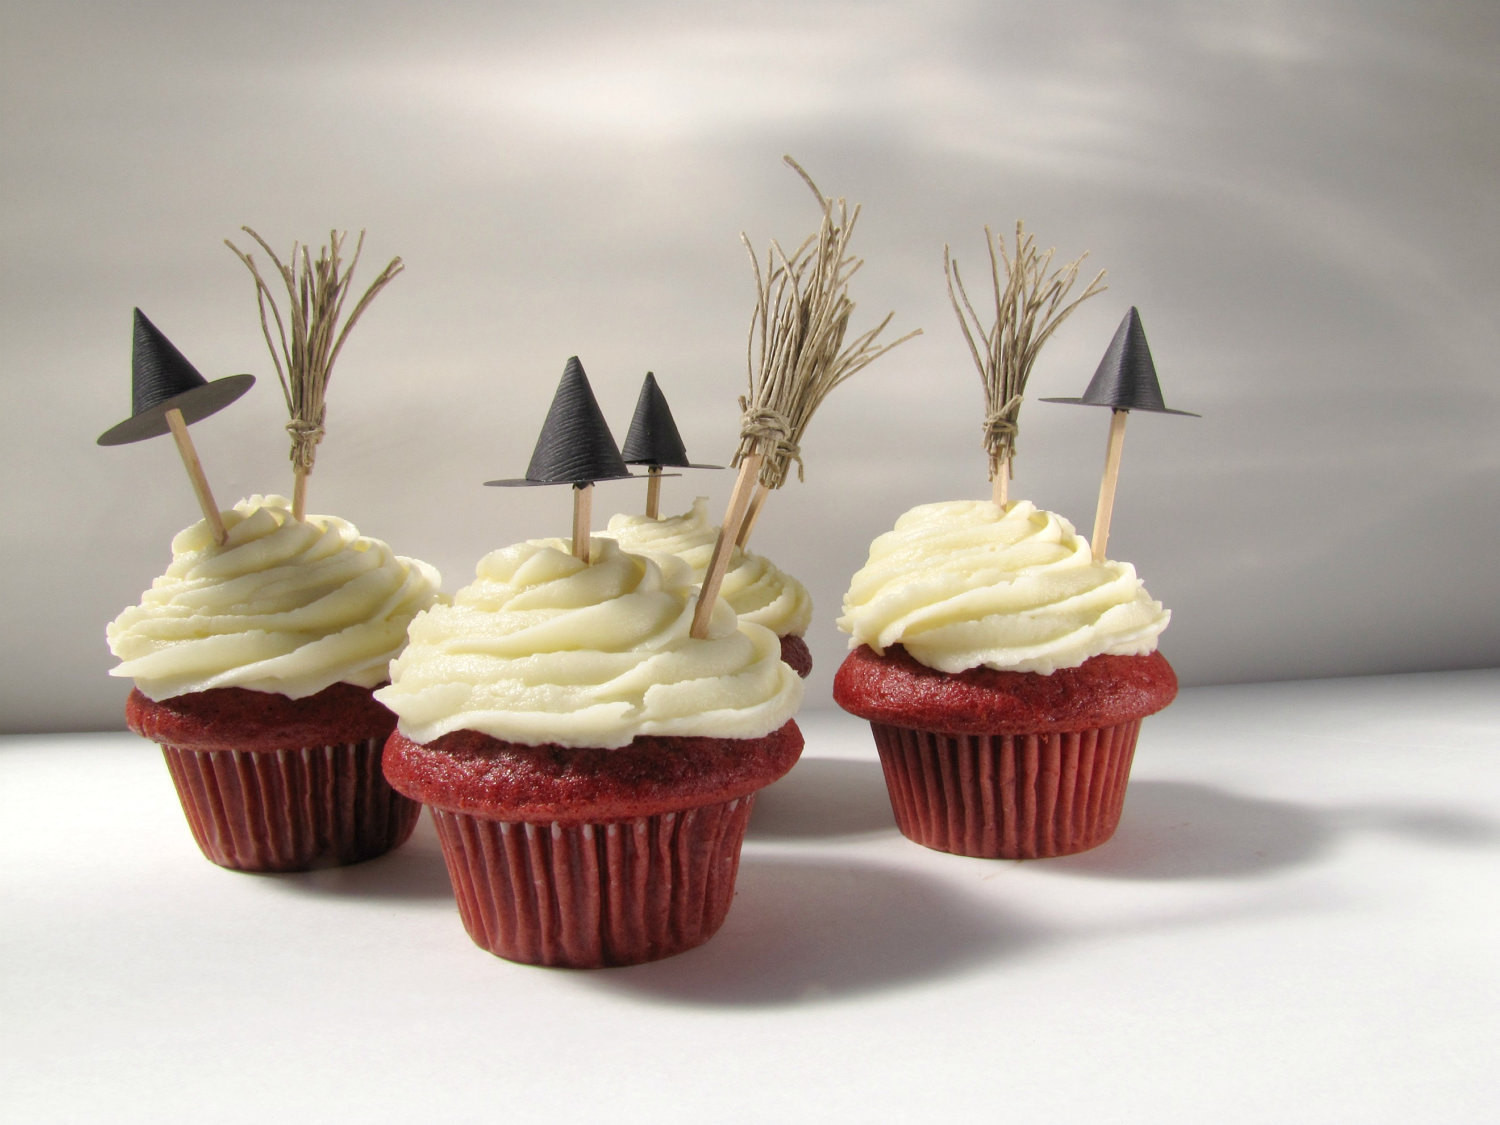 Halloween Decorating Cupcakes
 Halloween Cupcake Toppers Witch hats and brooms cupcake